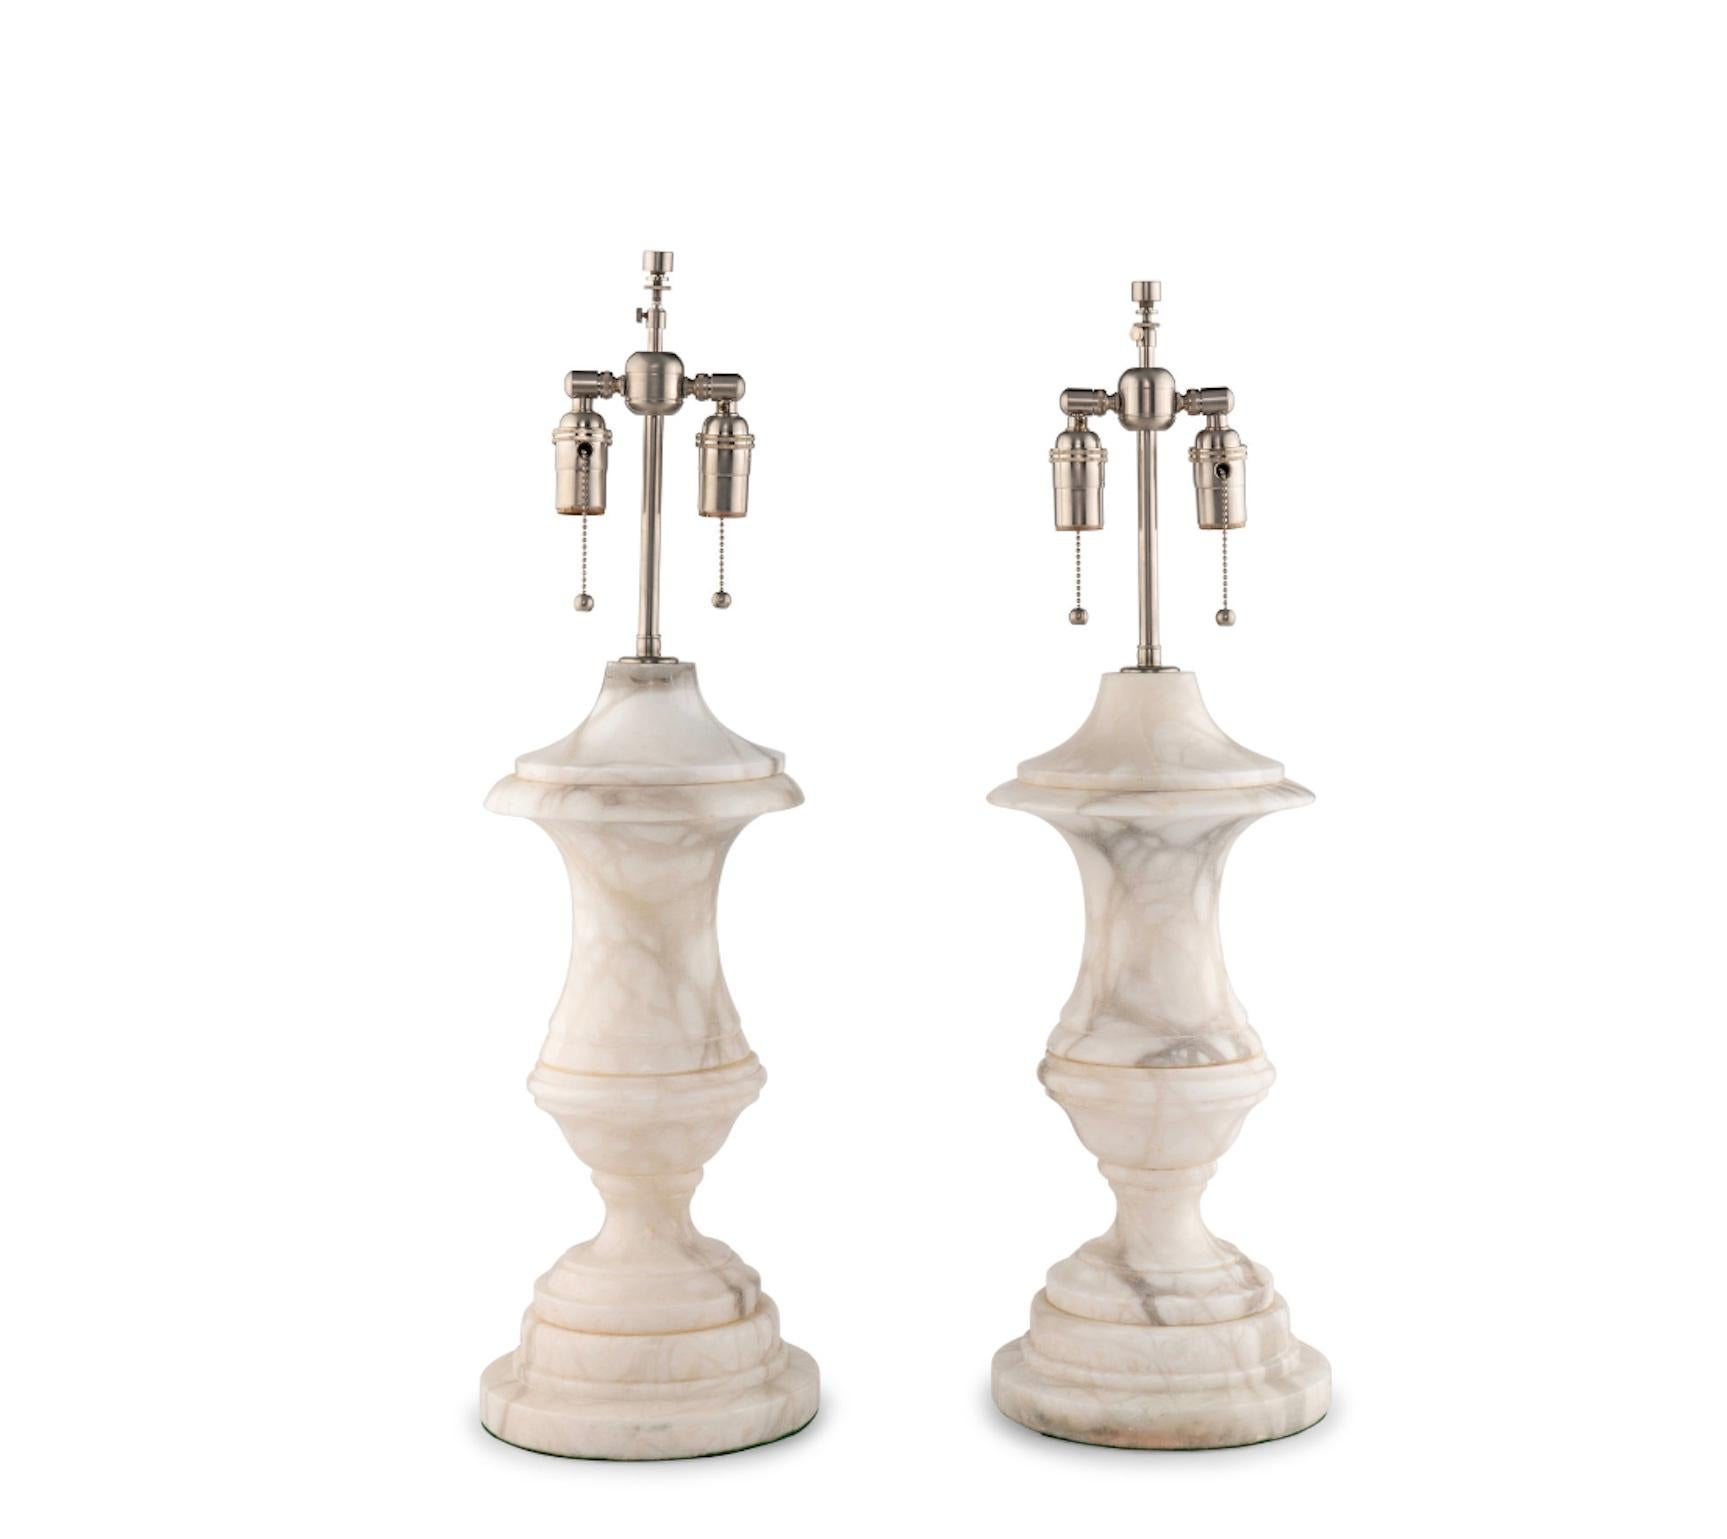 Neoclassical A Pair of Carrara Urn Lamps 20th Century from a David Easton-designed interior.